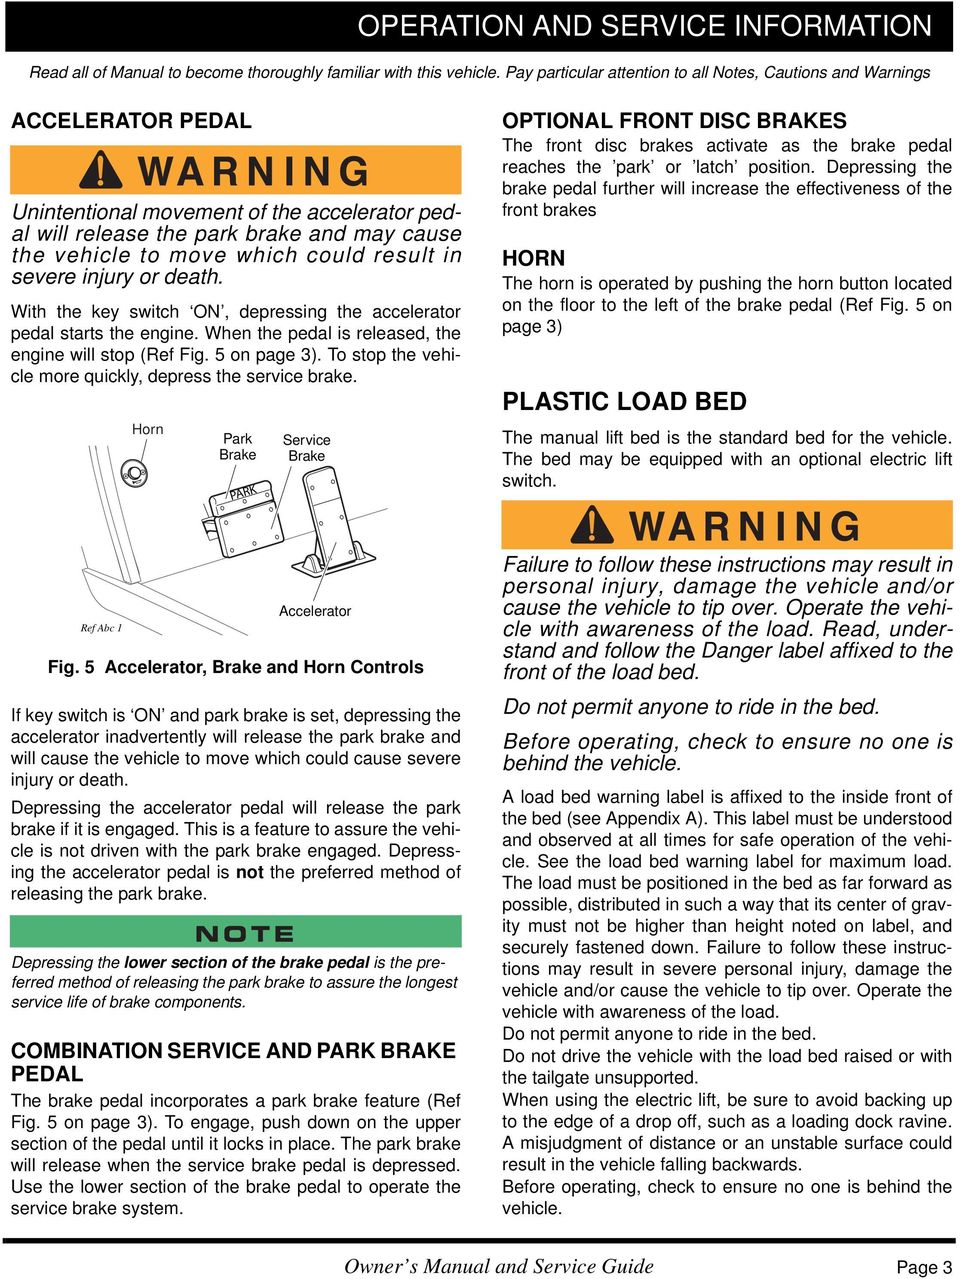 could result in severe injury or death. With the key switch ON, depressing the accelerator pedal starts the engine. When the pedal is released, the engine will stop (Ref Fig. 5 on page 3).